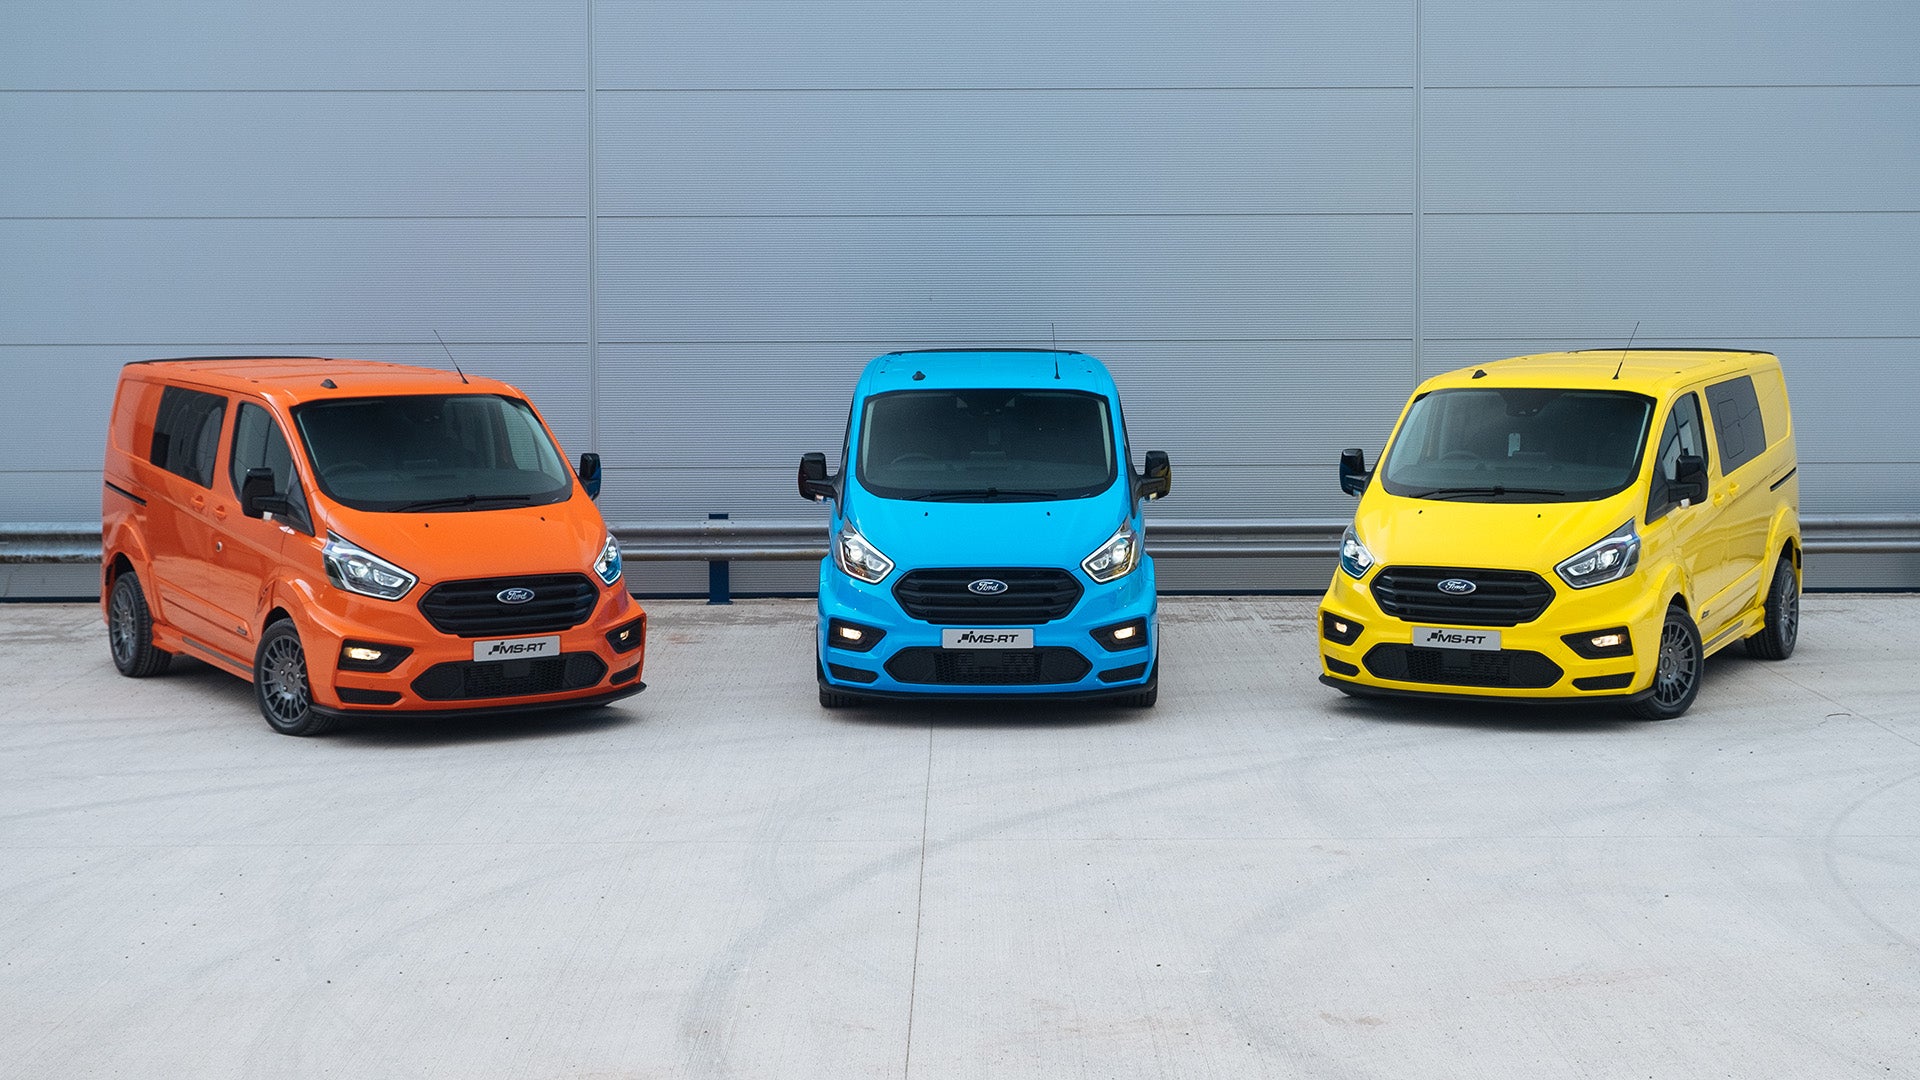 The Ford Transit Van Gets Hotter With New Rally-Inspired Body Kit, Custom Colors